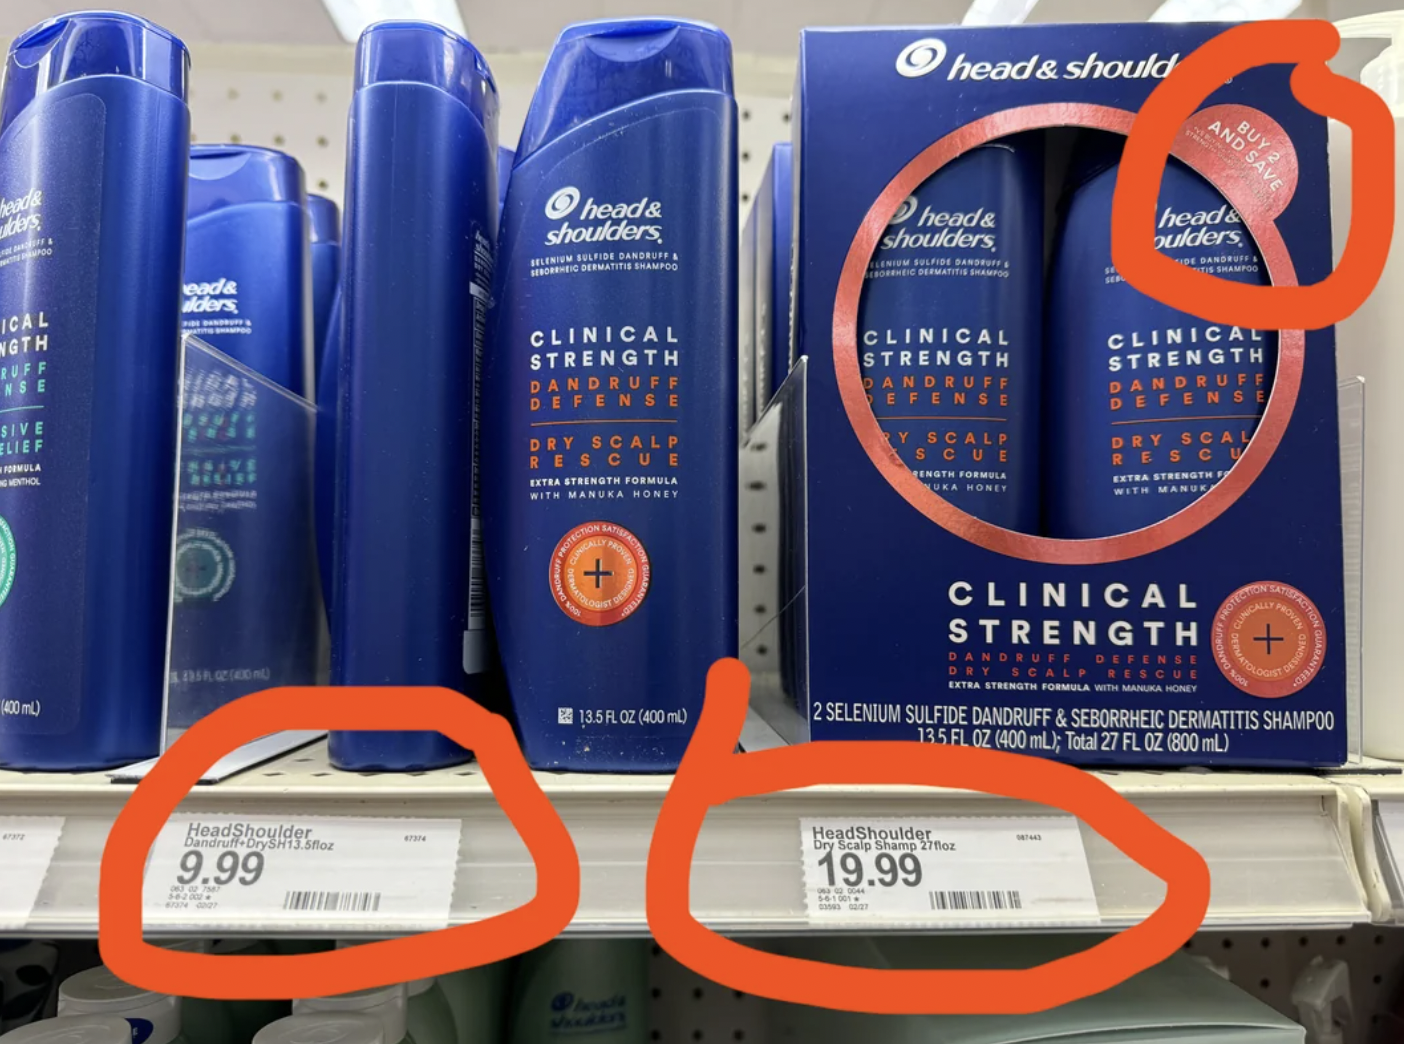 sunscreen - s Ical Ngth eads abenx head& shoulders Live Life 400 HeadShoulder 9.99 head&should Buy And Save head& shoulders head oulders Clinical Strength Dandruff Defense Dry Scalp Rescue Strength Clinical Clinical Strength Dandruff Efense Y Scalp Scue D